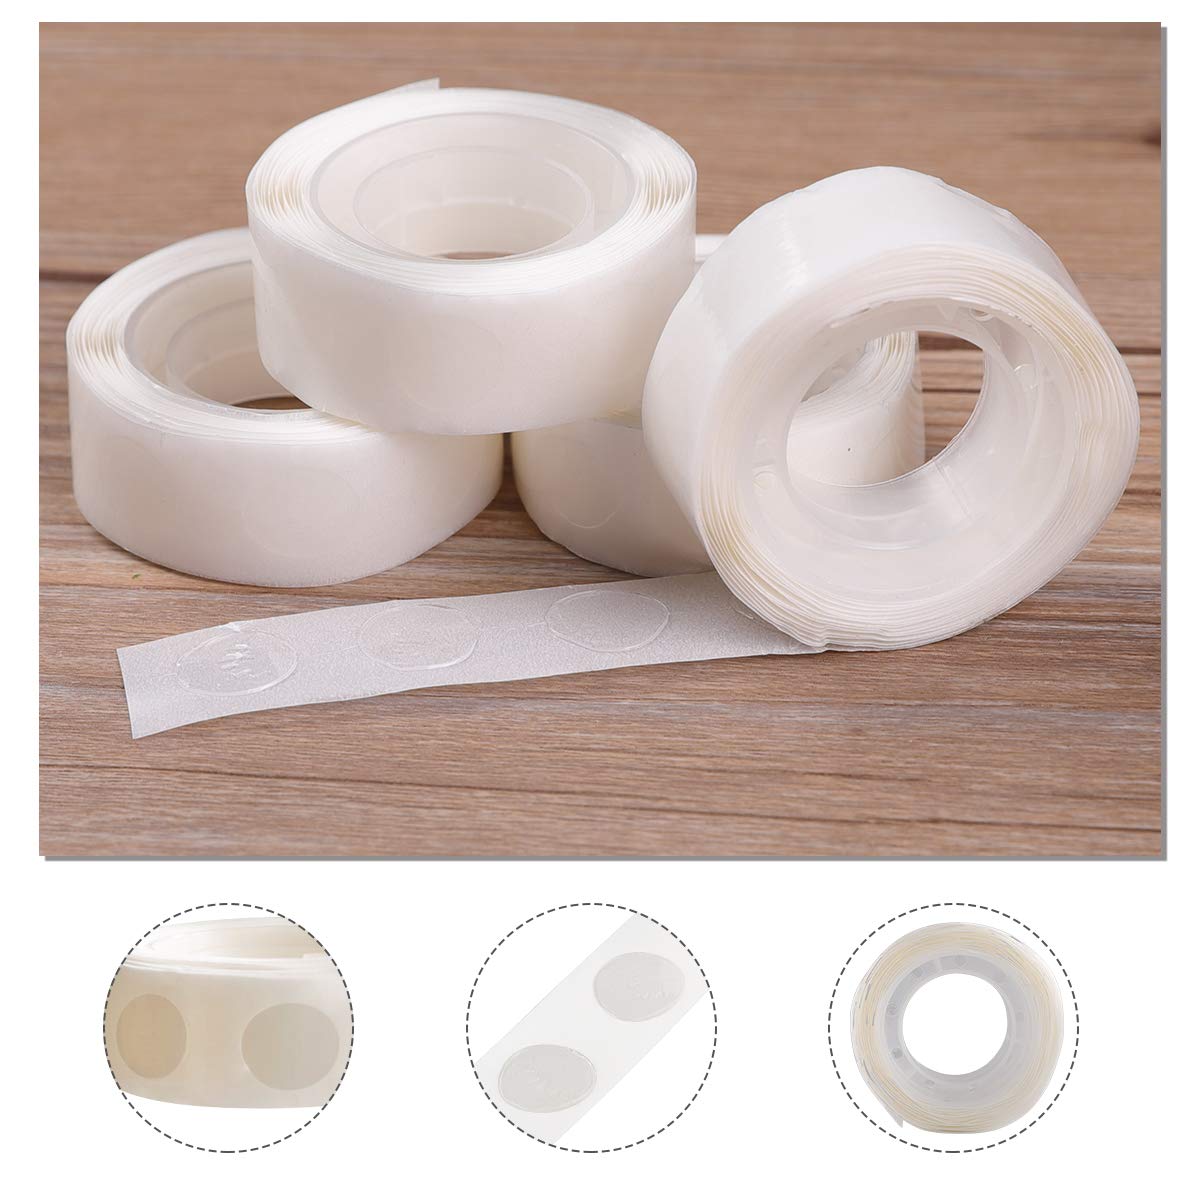 gegemaoyi 3000pcs Glue Point Clear Balloon Glue Removable Adhesive Dots Double Sided Dots of Glue Tape for Balloons Craft Glue Points Dots